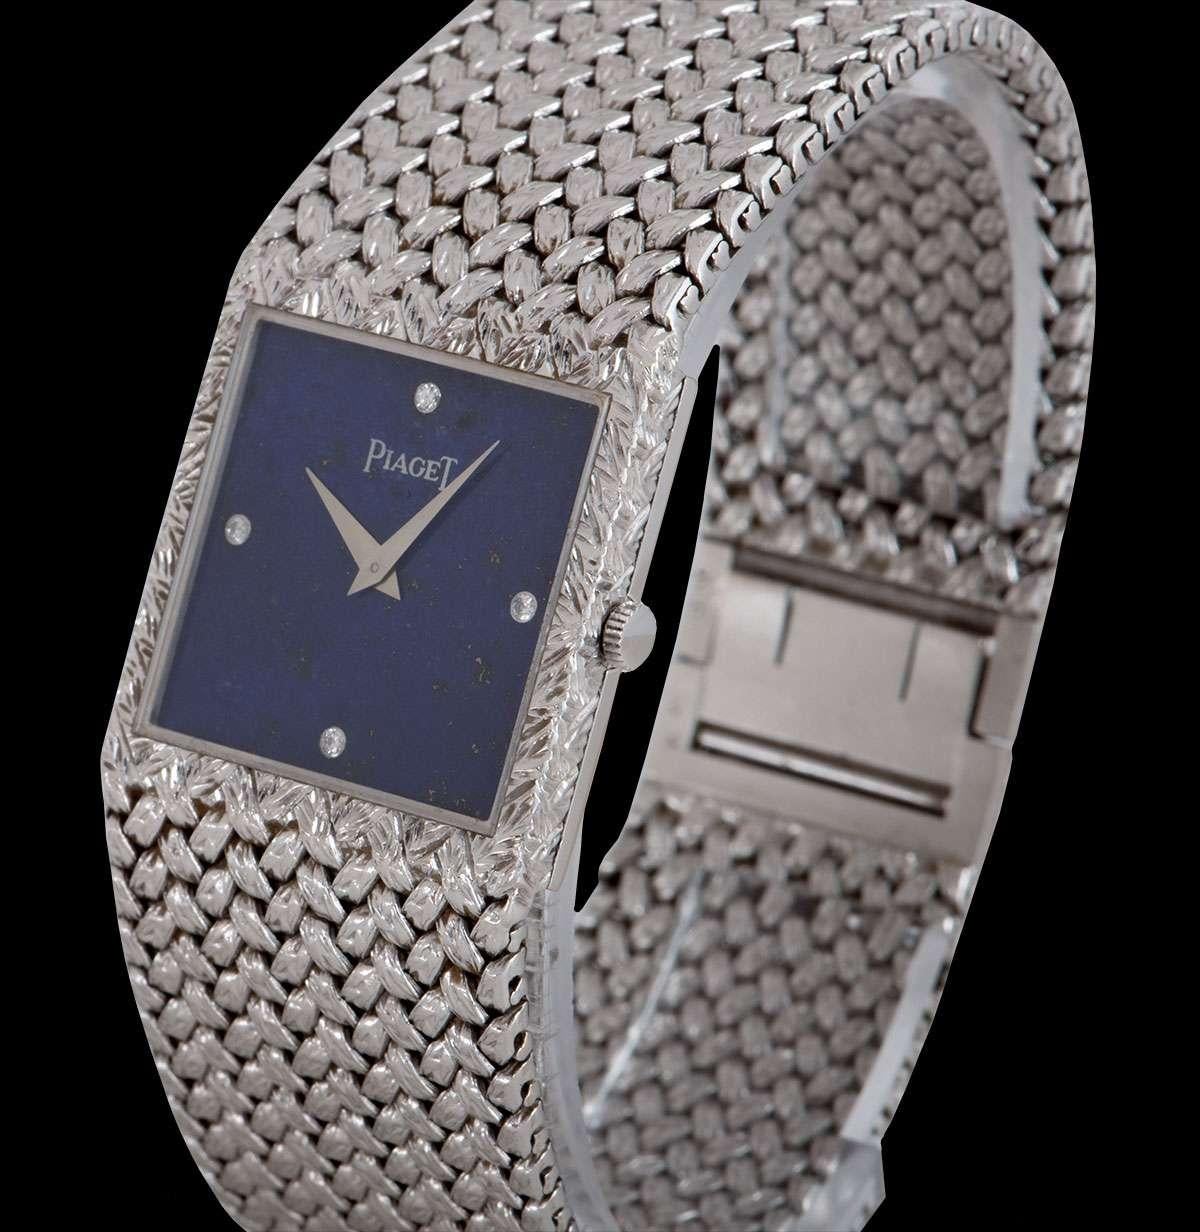 A 25 mm  18k White Gold Gents Dress Wristwatch, lapis lazuli dial set with 4 round brilliant cut diamond hour markers, a fixed 18k white gold bezel, an 18k white gold integrated bracelet with an 18k white gold jewellery style clasp, mineral glass,